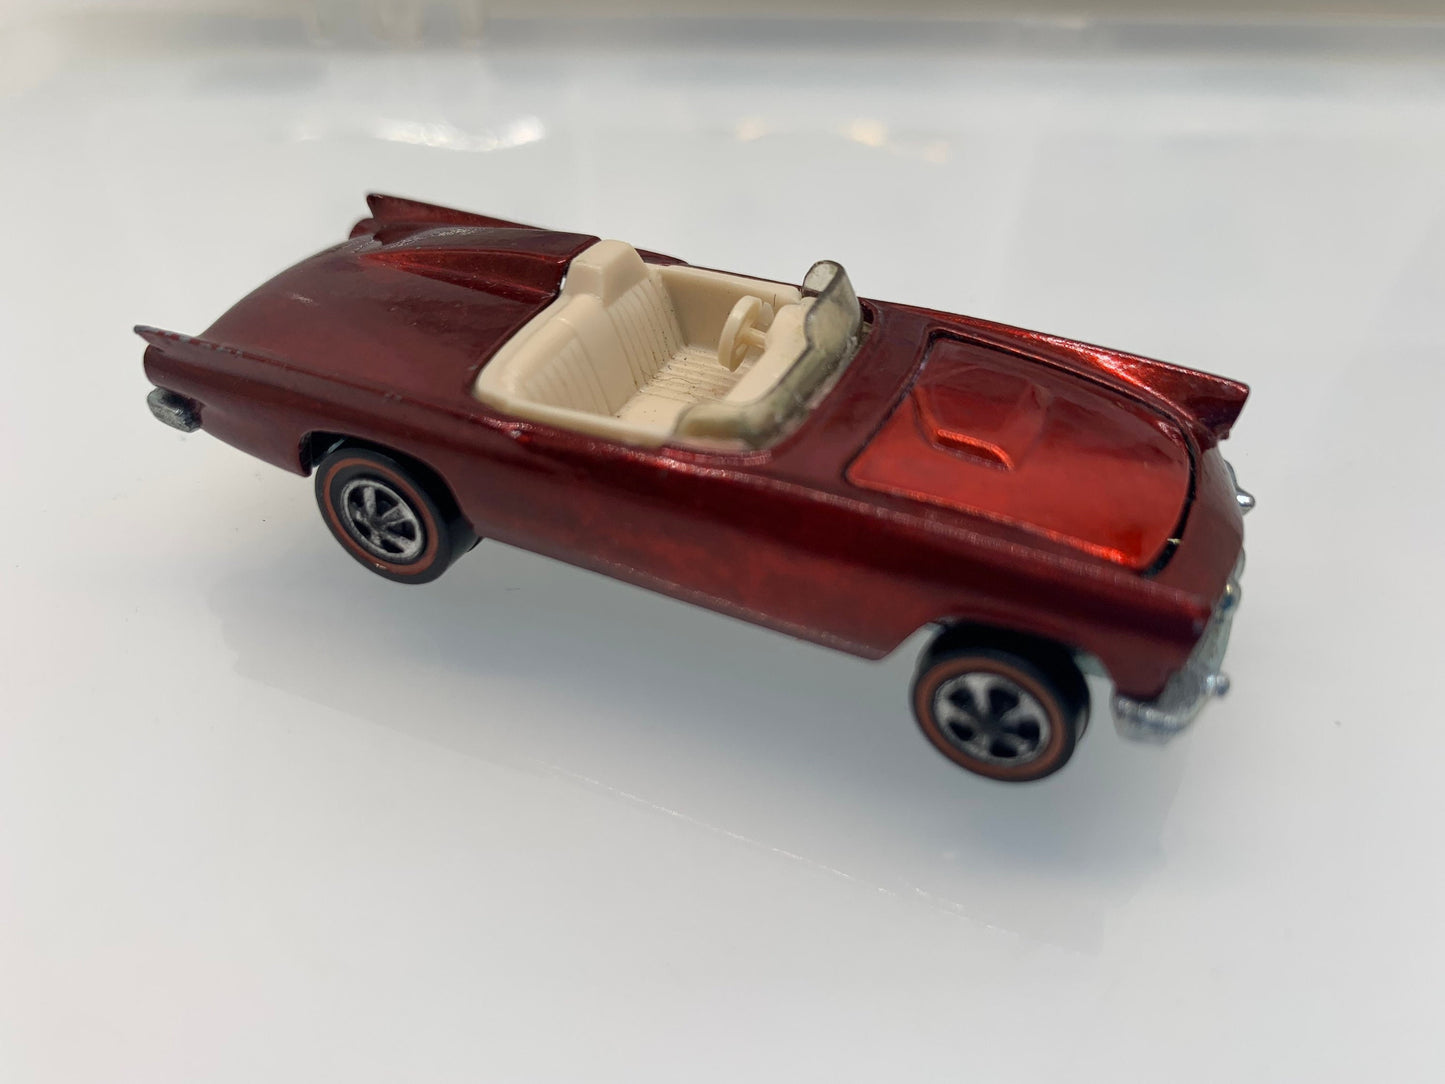 Redline Hot Wheels Classic '57 T-Bird Red Diecast Metal Collectible Vintage Hot Wheels Scale Miniature Model Toy Car